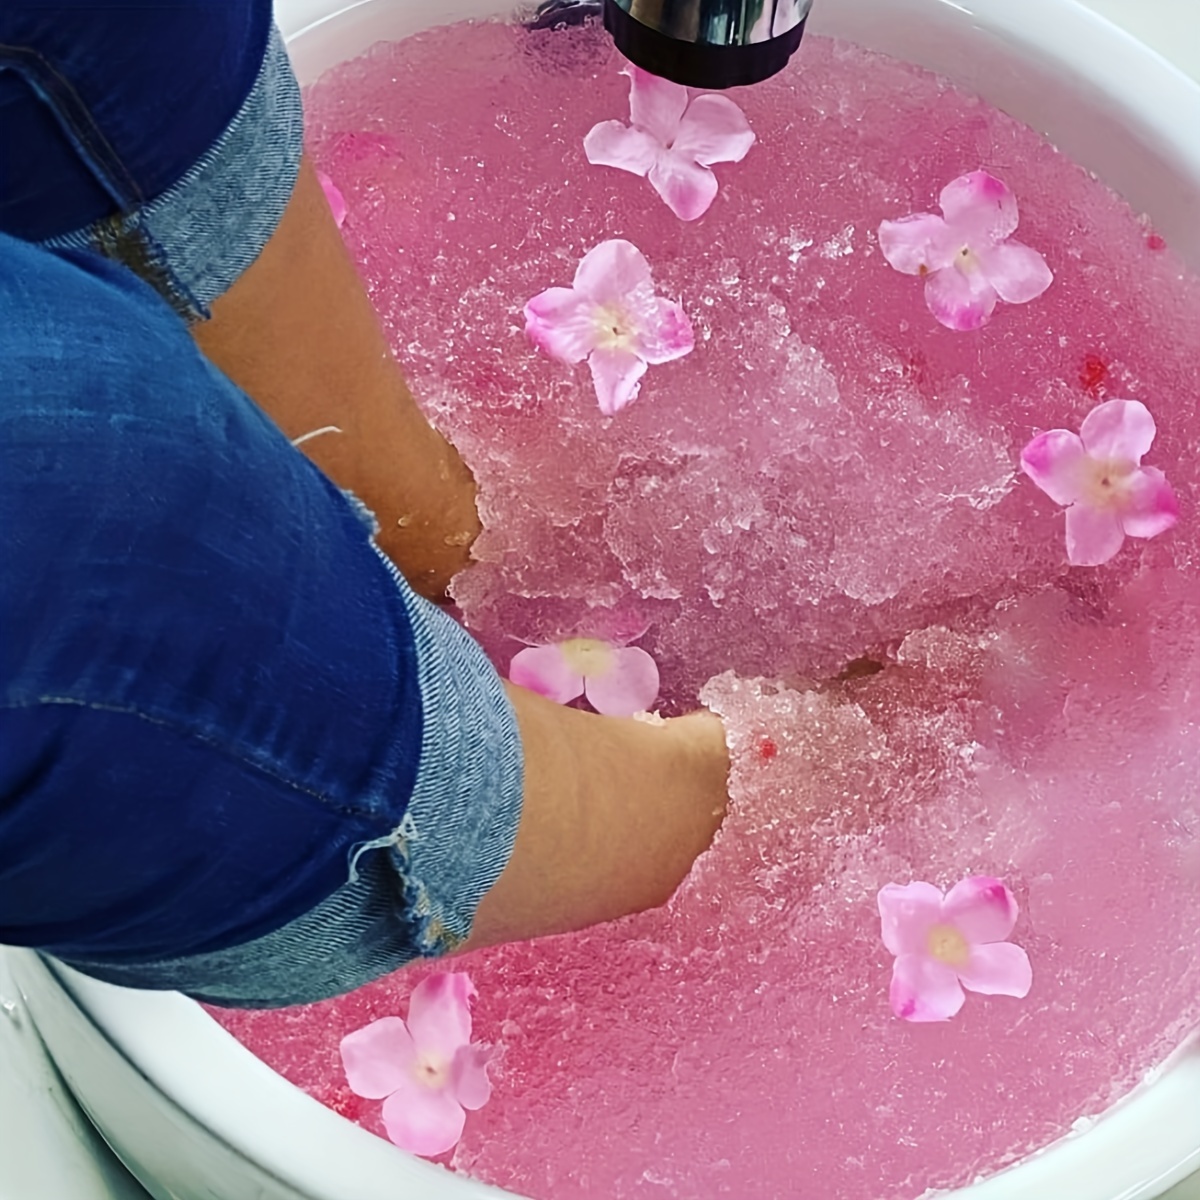 

Foot Soak, Crystal Jelly Spa Pedicure Spa, Bubble Foot Bath Spa, Foot Salt Soak For Stubborn Foot Odor Tired Dry Cracked Feet Foot Care For Women Men Summer Essential-lavender, Rose,strawberries